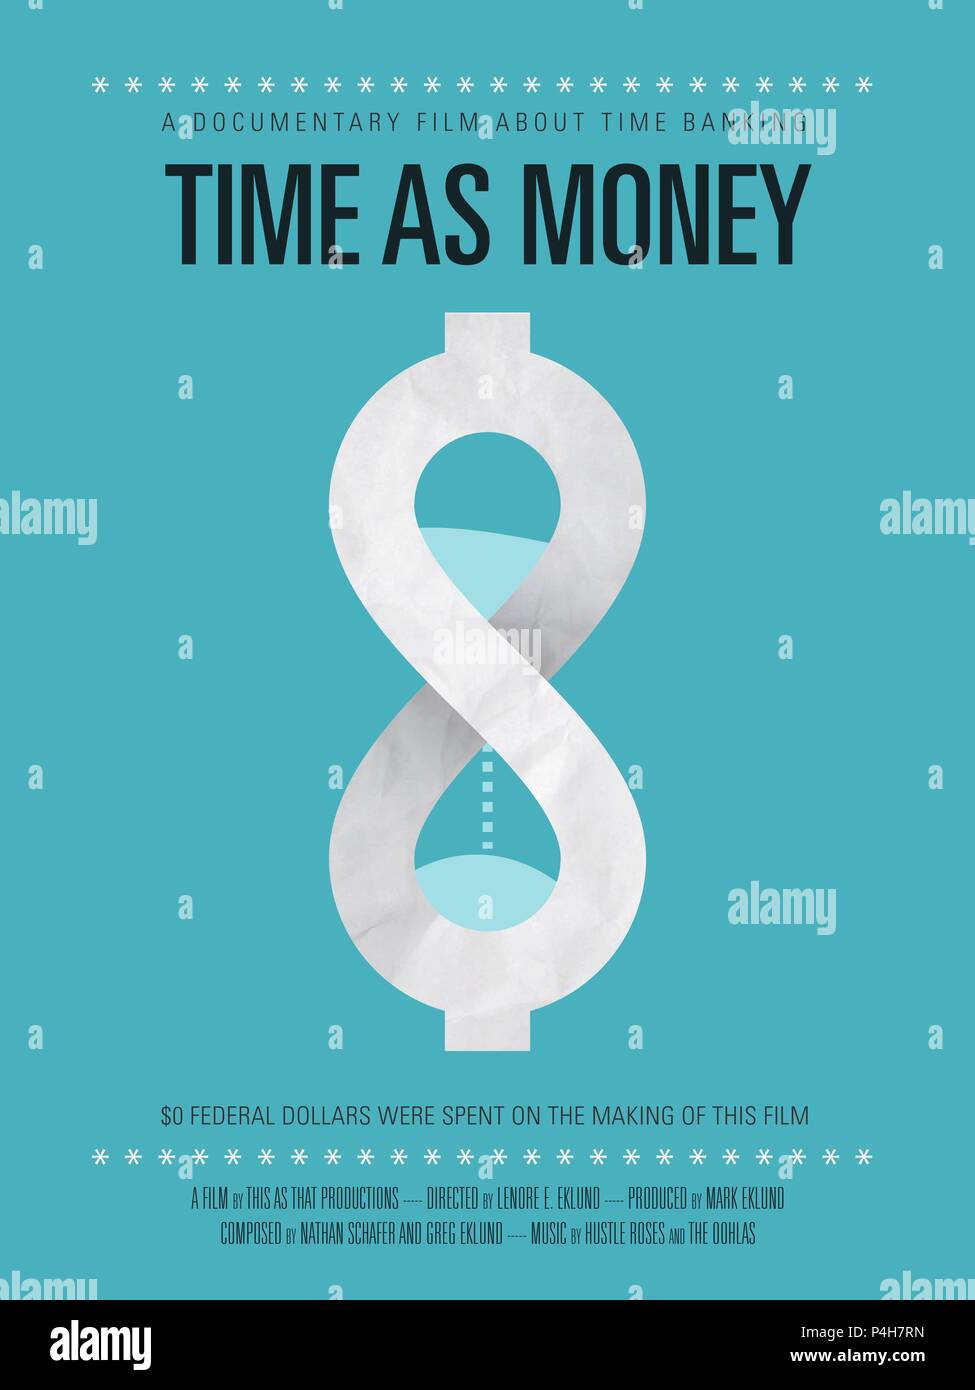 Original Film Title: TIME AS MONEY: A DOCUMENTARY ABOUT TIME BANKING.  English Title: TIME AS MONEY: A DOCUMENTARY ABOUT TIME BANKING.  Year: 2014. Credit: THIS AS THAT PRODUCTIONS / Album Stock Photo